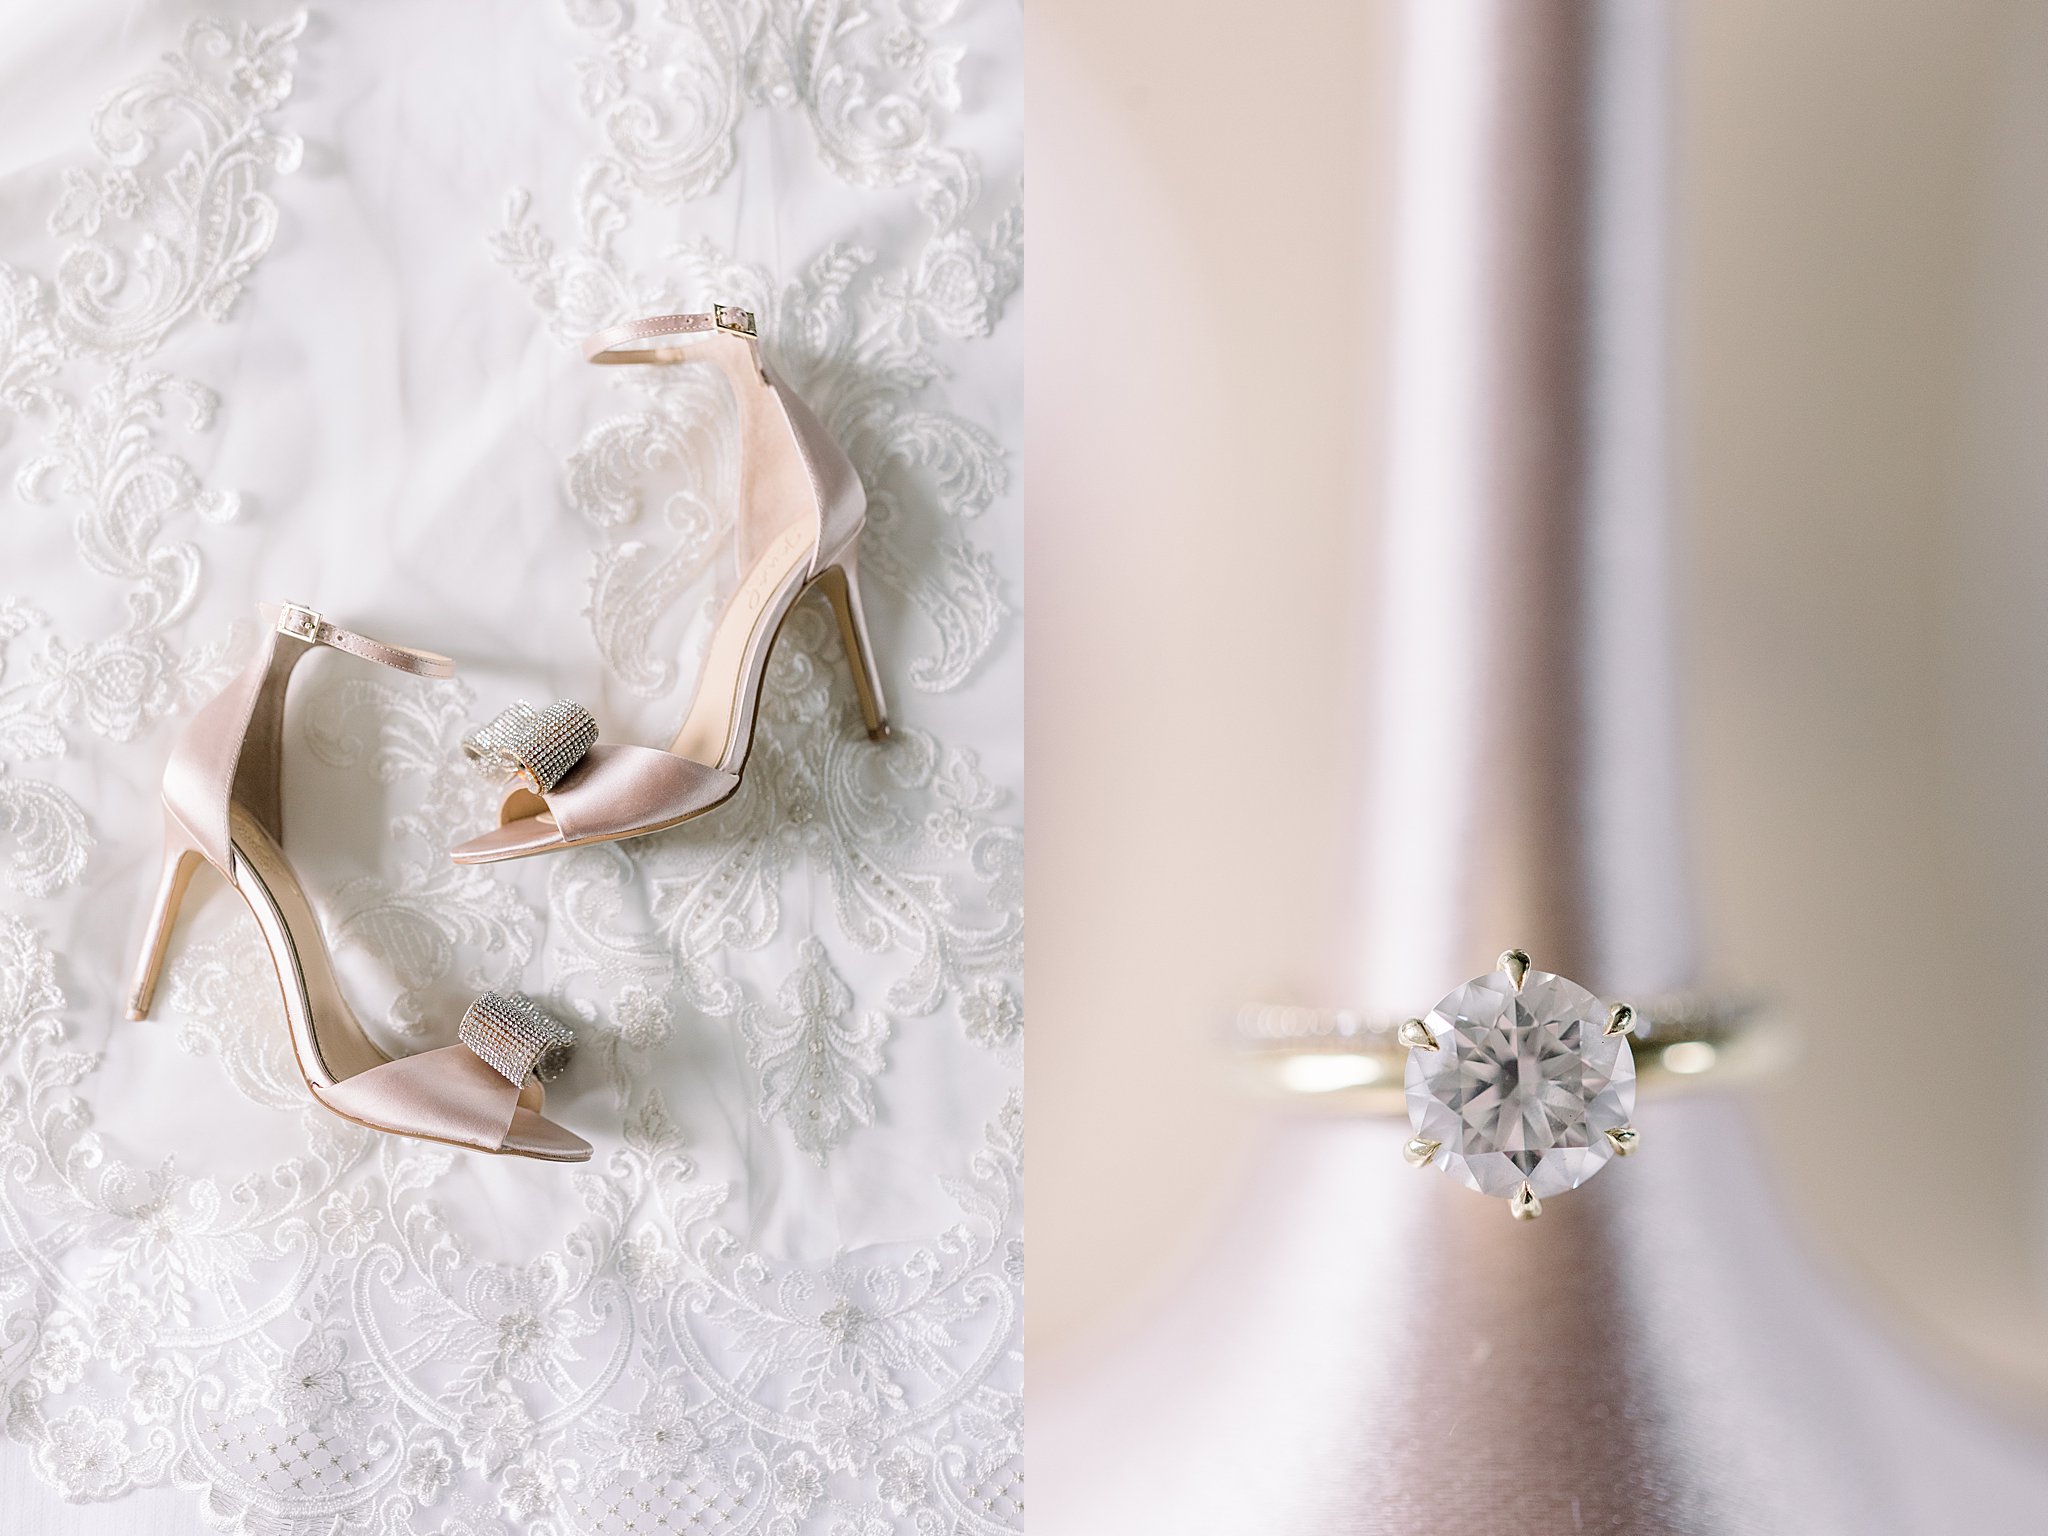 Bride's shoes and ring detail photos for elegant Grand Rapids wedding.